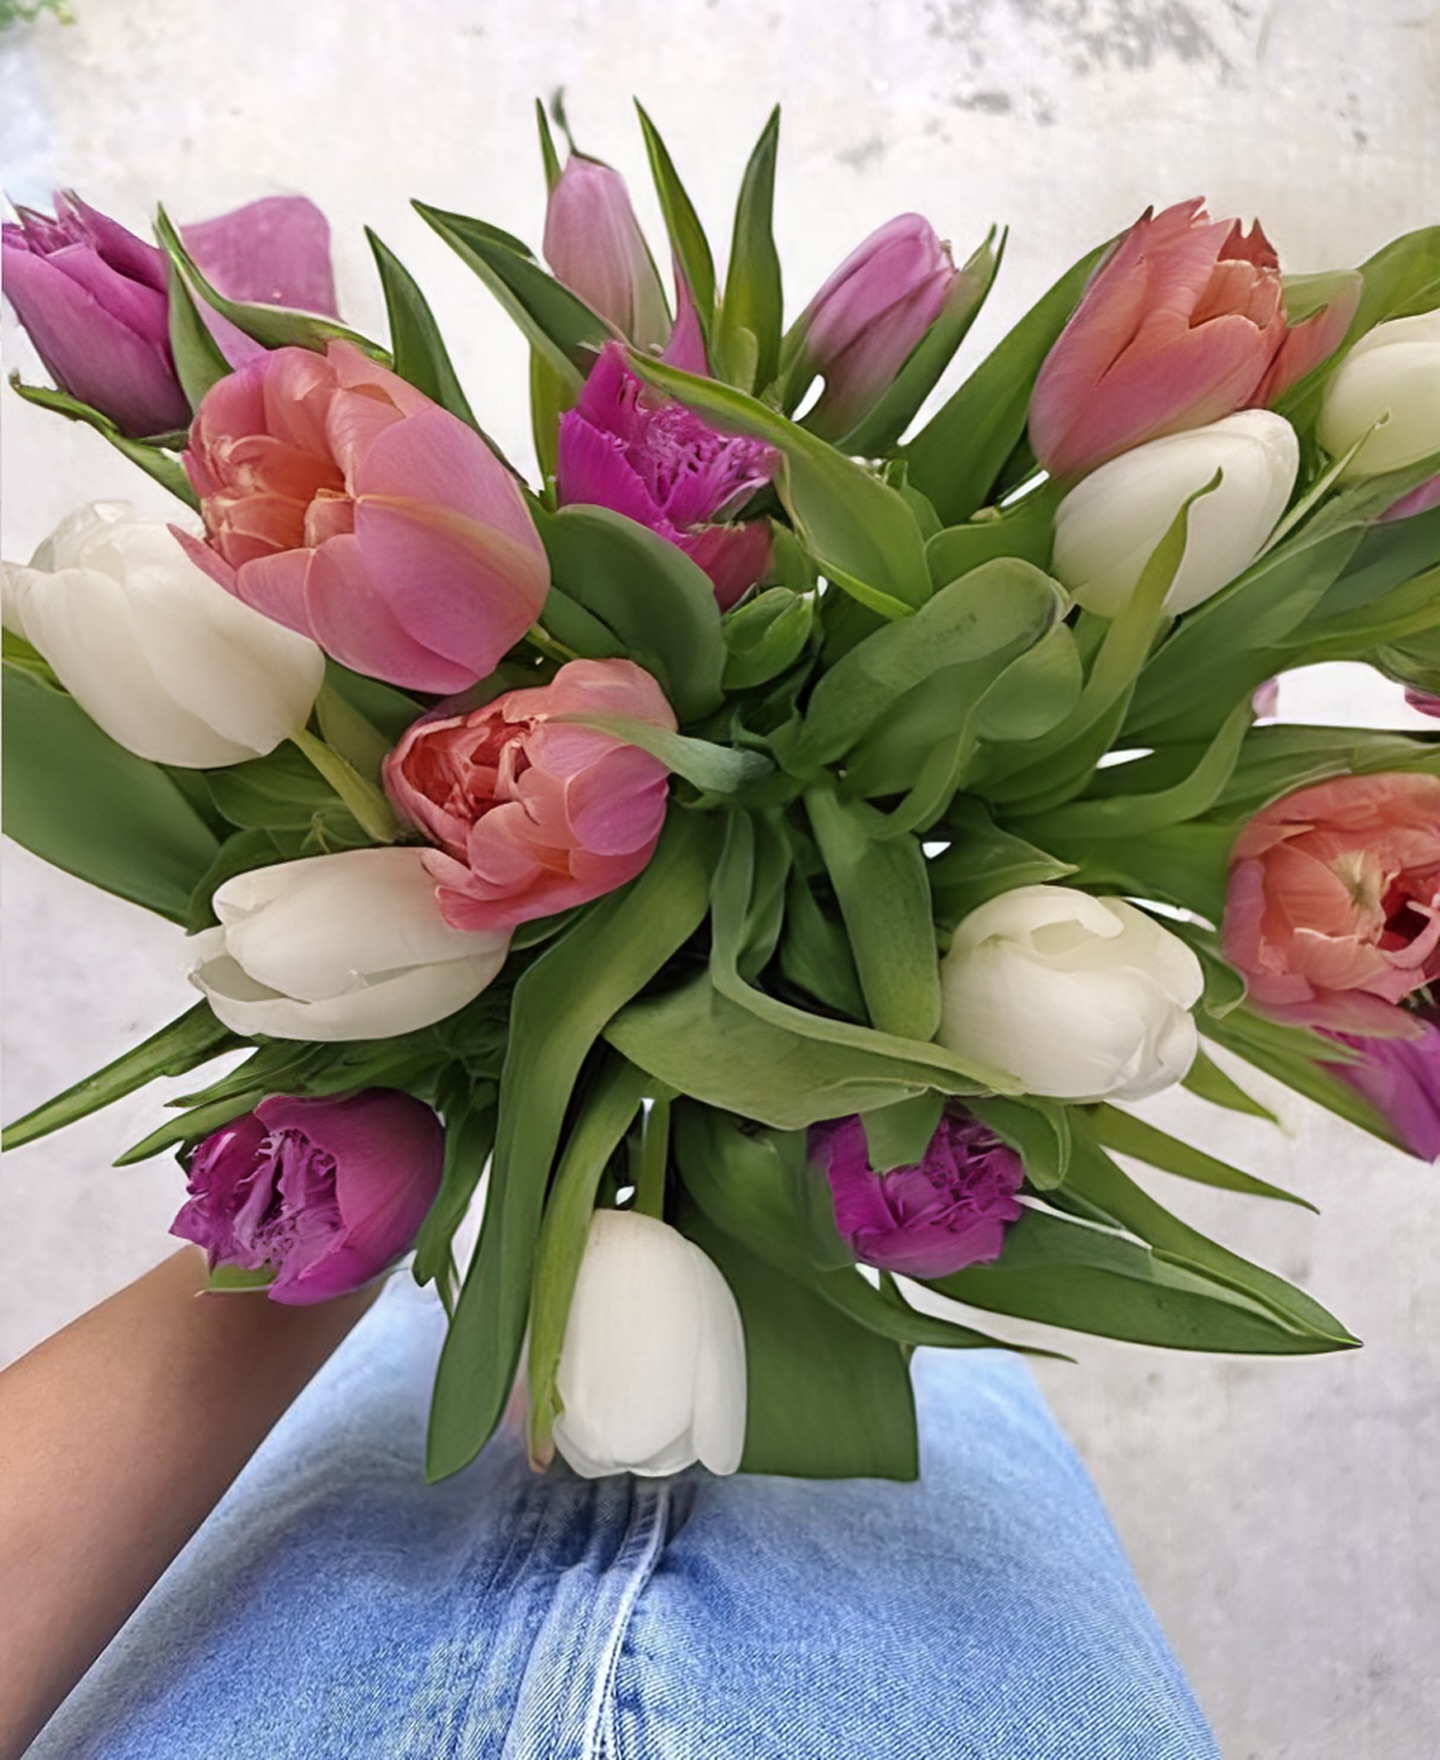 ✨Get 50% off our Bouquet of the MONTH💐

THE FUCHSIA ✨🌷 
30 BRITISH Tulips in pink, white & purple

Was £36, now £18. 
INCLUDES FREE UK courier delivery and a FREE personalised card. 
LIMITED TIME OFFER * AVAILABLE for the first 250 ORDERS ONLY!

GET THE OFFER IN 3 EASY STEPS: 
1. FOLLOW us ➡️ 
2. COMMENT ‘Flower Delivery’
3. We’ll send you a CODE for 50% OFF THE FUCHSIA, to be redeemed at checkout. 

WHY ARE WE DOING THIS?
It’s simple. We’re a budding flower company wanting to make a name for ourselves. We know how good our flowers are and we want you to know too. We can TELL you ALL ABOUT the QUALITY of our flowers, our BEAUTIFUL packaging, our FREE UK WIDE courier delivery and tell you that each bouquet includes a FREE personalised card and bouquet flower tips, BUT unless you experience this first-hand, whatever we say is just blah blah blah. Instead, we thought we would SHOW YOU how good our flowers are introducing our 50% OFF Bouquet of the Month. With the Tulip season coming to a close, we’re offering you 50% off THE FUCHSIA, with 30 luscious stems of BRITISH Tulips in purple, pink and white. We hope you love them as much as we do.

TERMS & CONDITIONS: 
* Available to new and existing PetalBud customers. 
* One bouquet per customer.
* Offer only applicable to The Fuchsia bouquet and not combinable with any other offers.
* Offer is valid for the first 250 bouquet vouchers redeemed. 
* This offer is valid for redemption up to and including 07 May 2024 at 23.59.
* Last delivery date for this offer is 10 May 2024. 
* Choose an available delivery date from the online calendar for delivery on or before 10 May 2024.